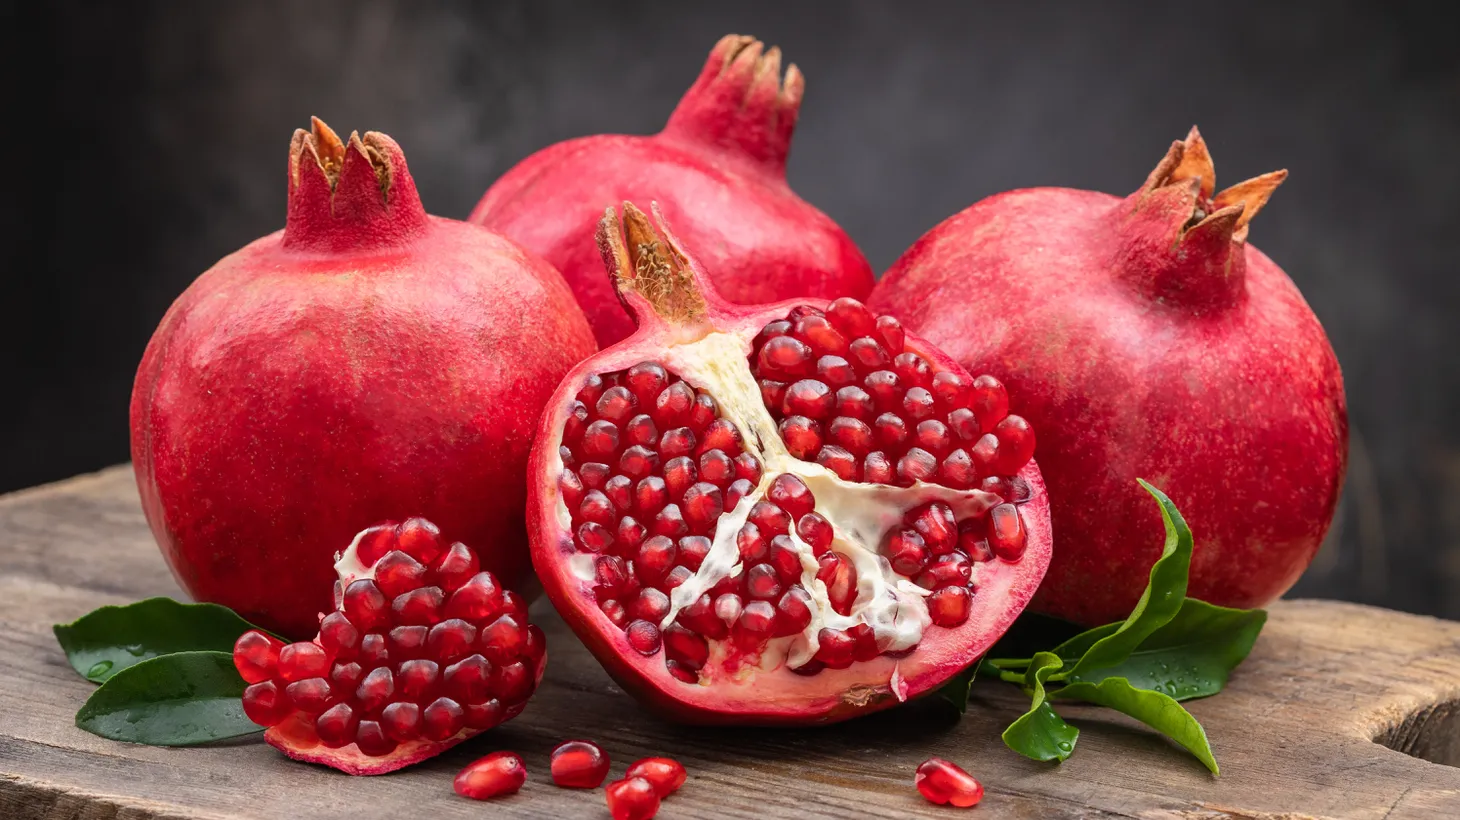 Pomegranates are much more than fodder for holiday table displays.